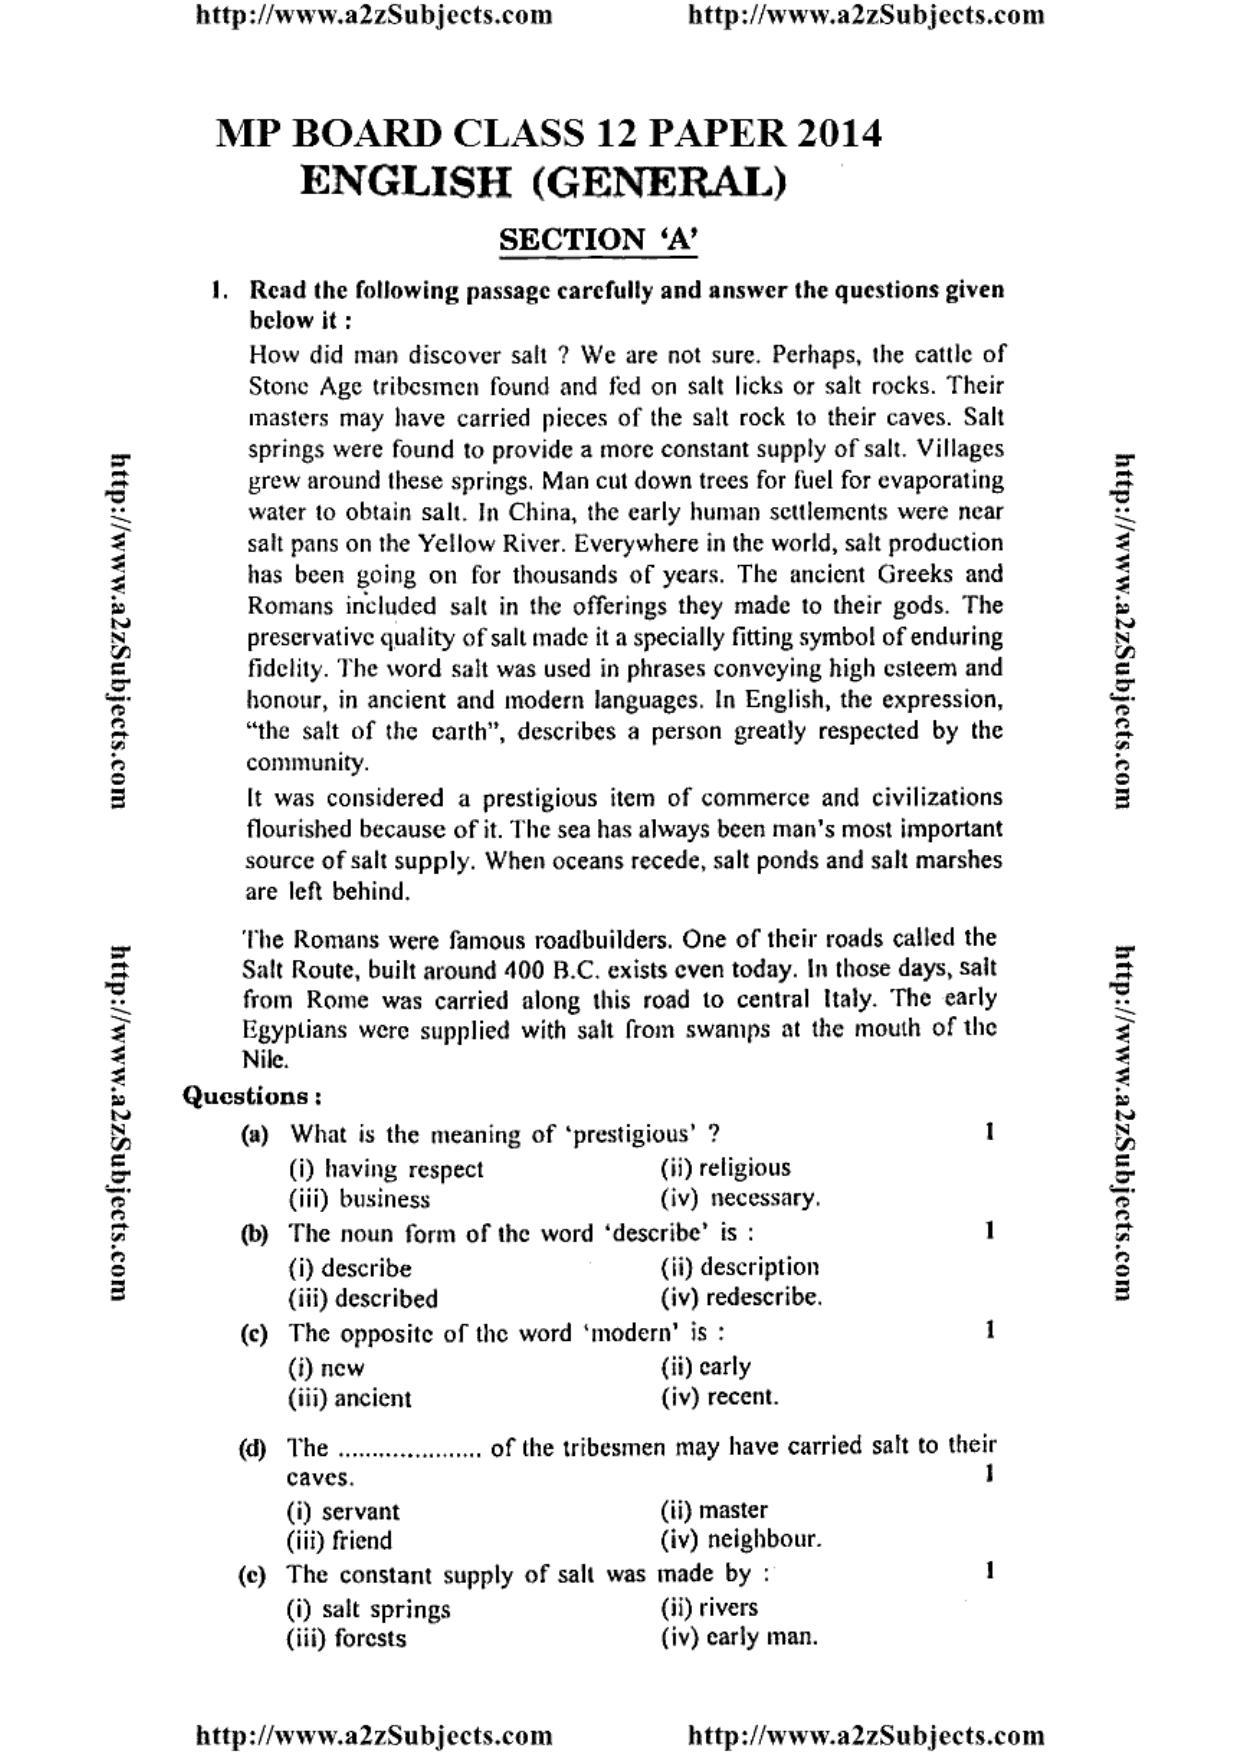 MP Board Class 12 English General 2014 Question Paper - Page 1